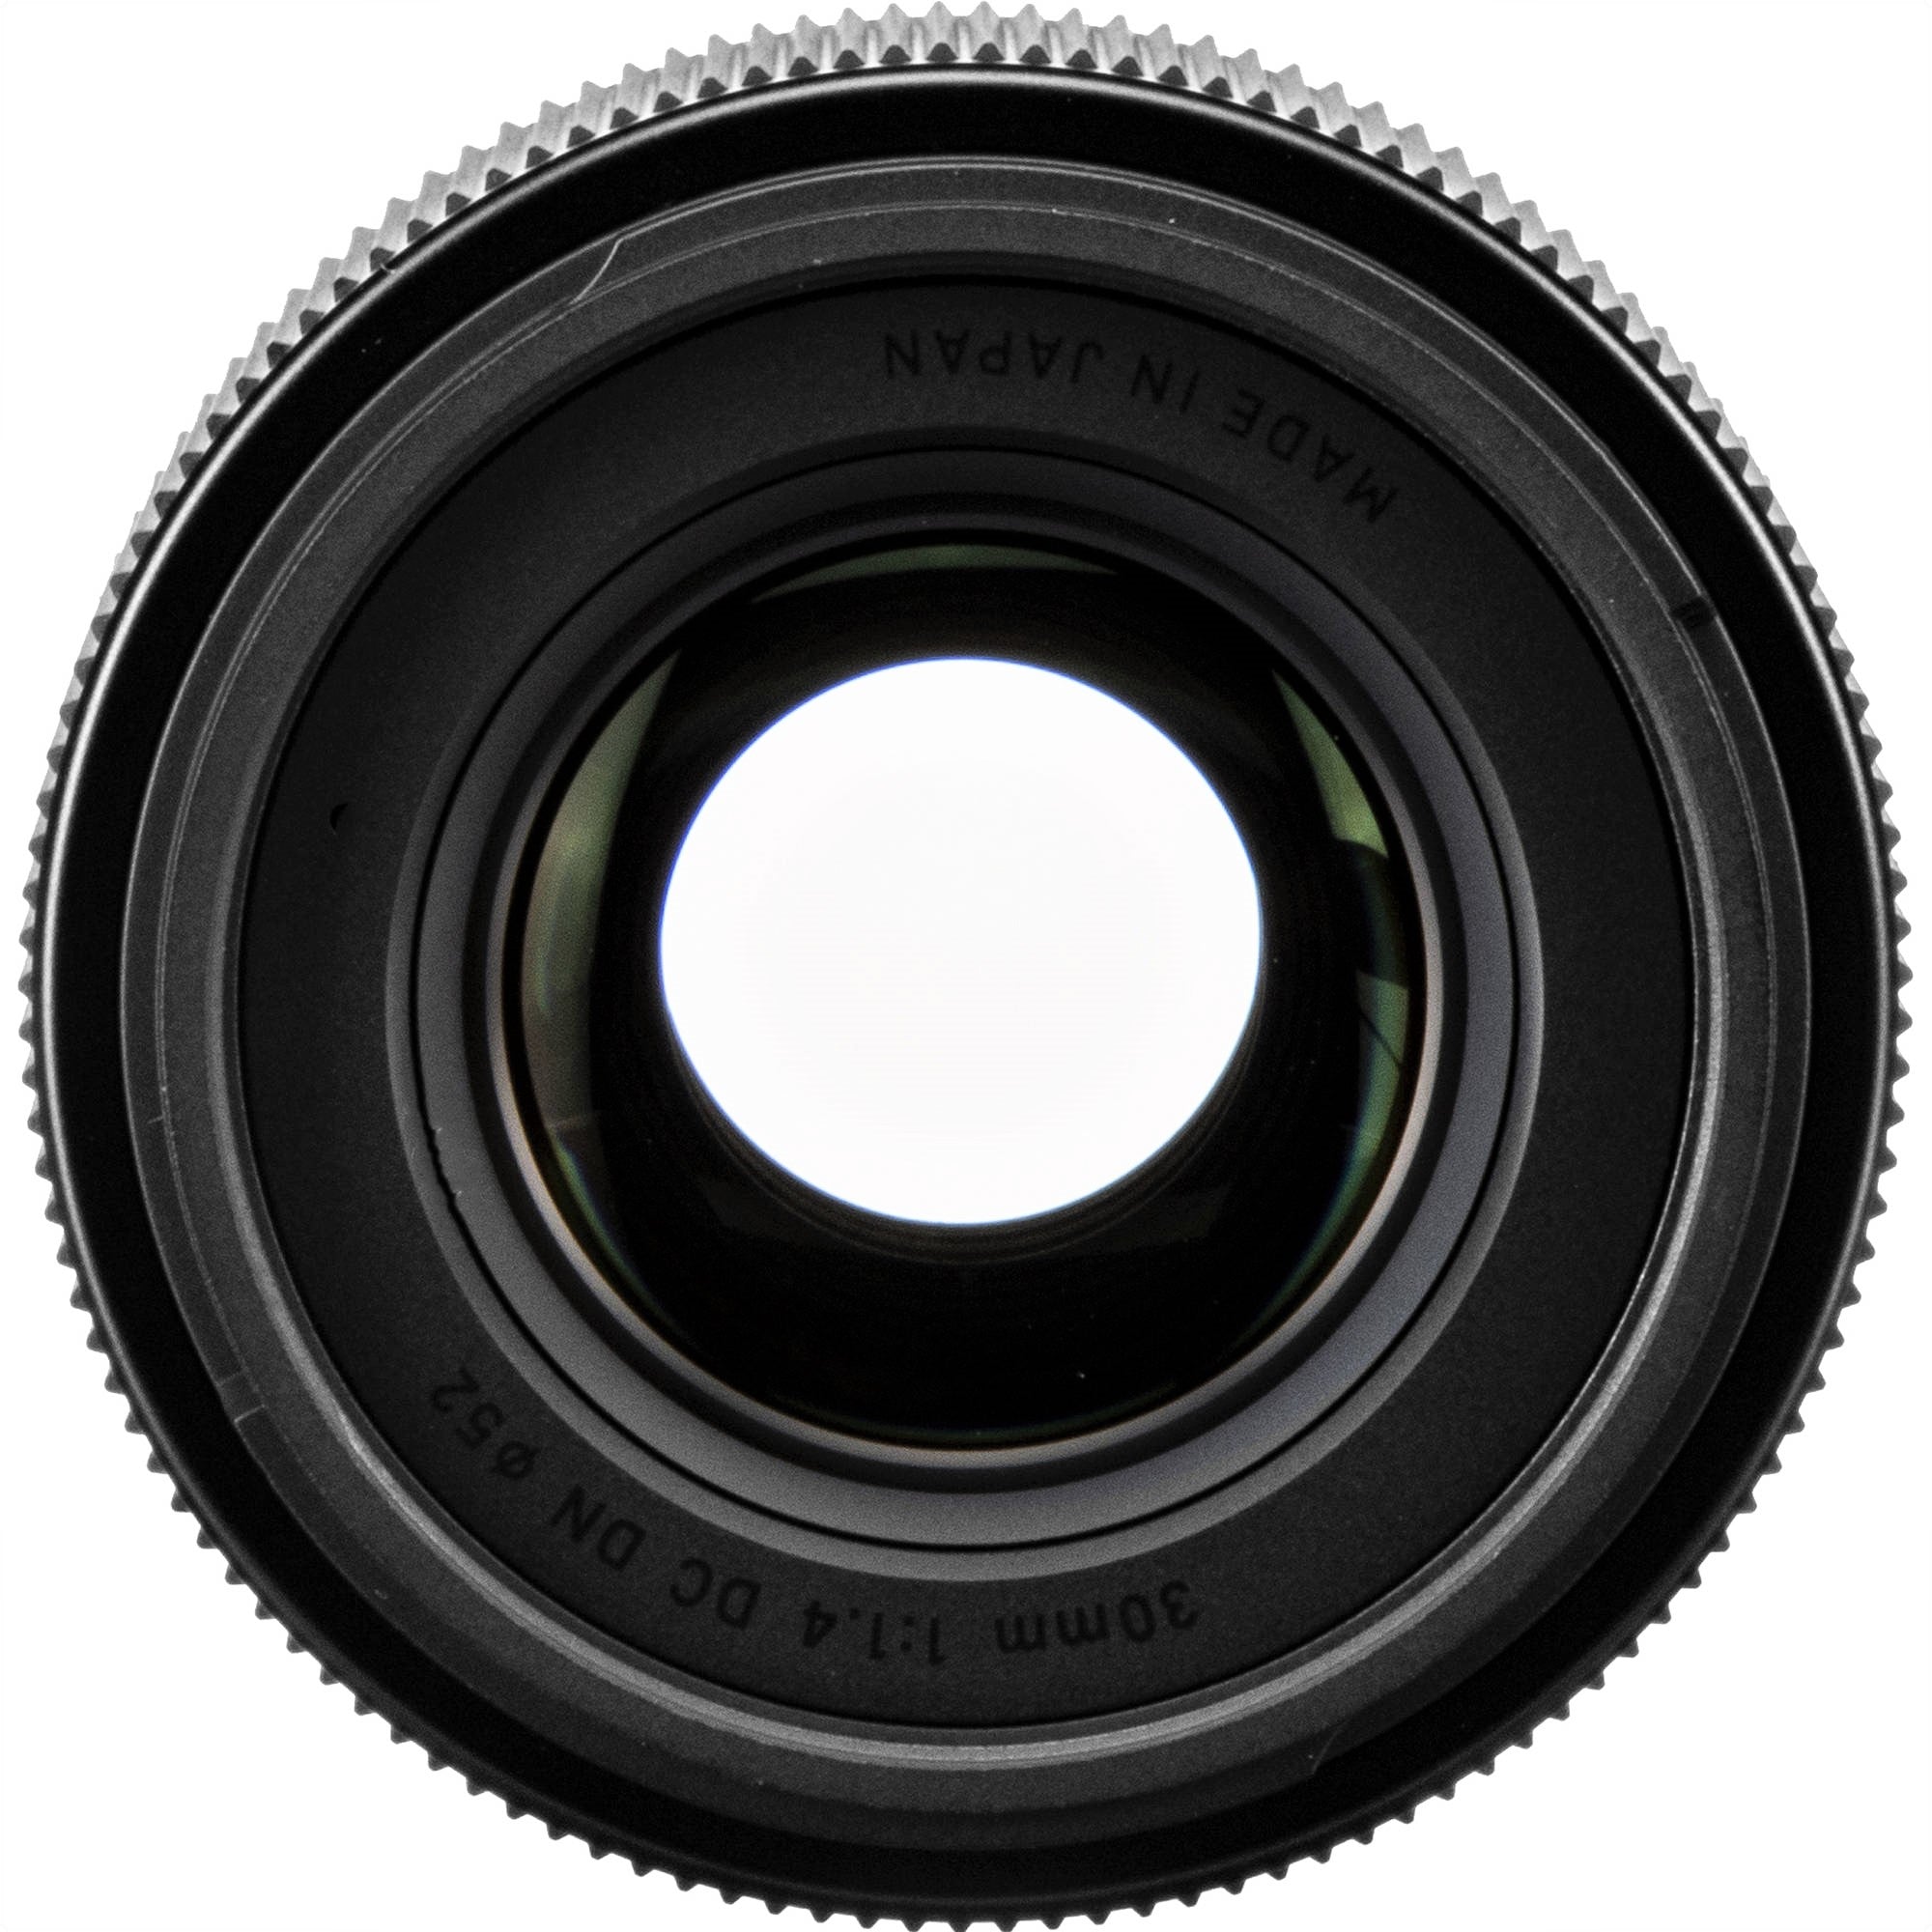 Sigma 30mm F1.4 DC DN Contemporary Lens for Sony E - Front View